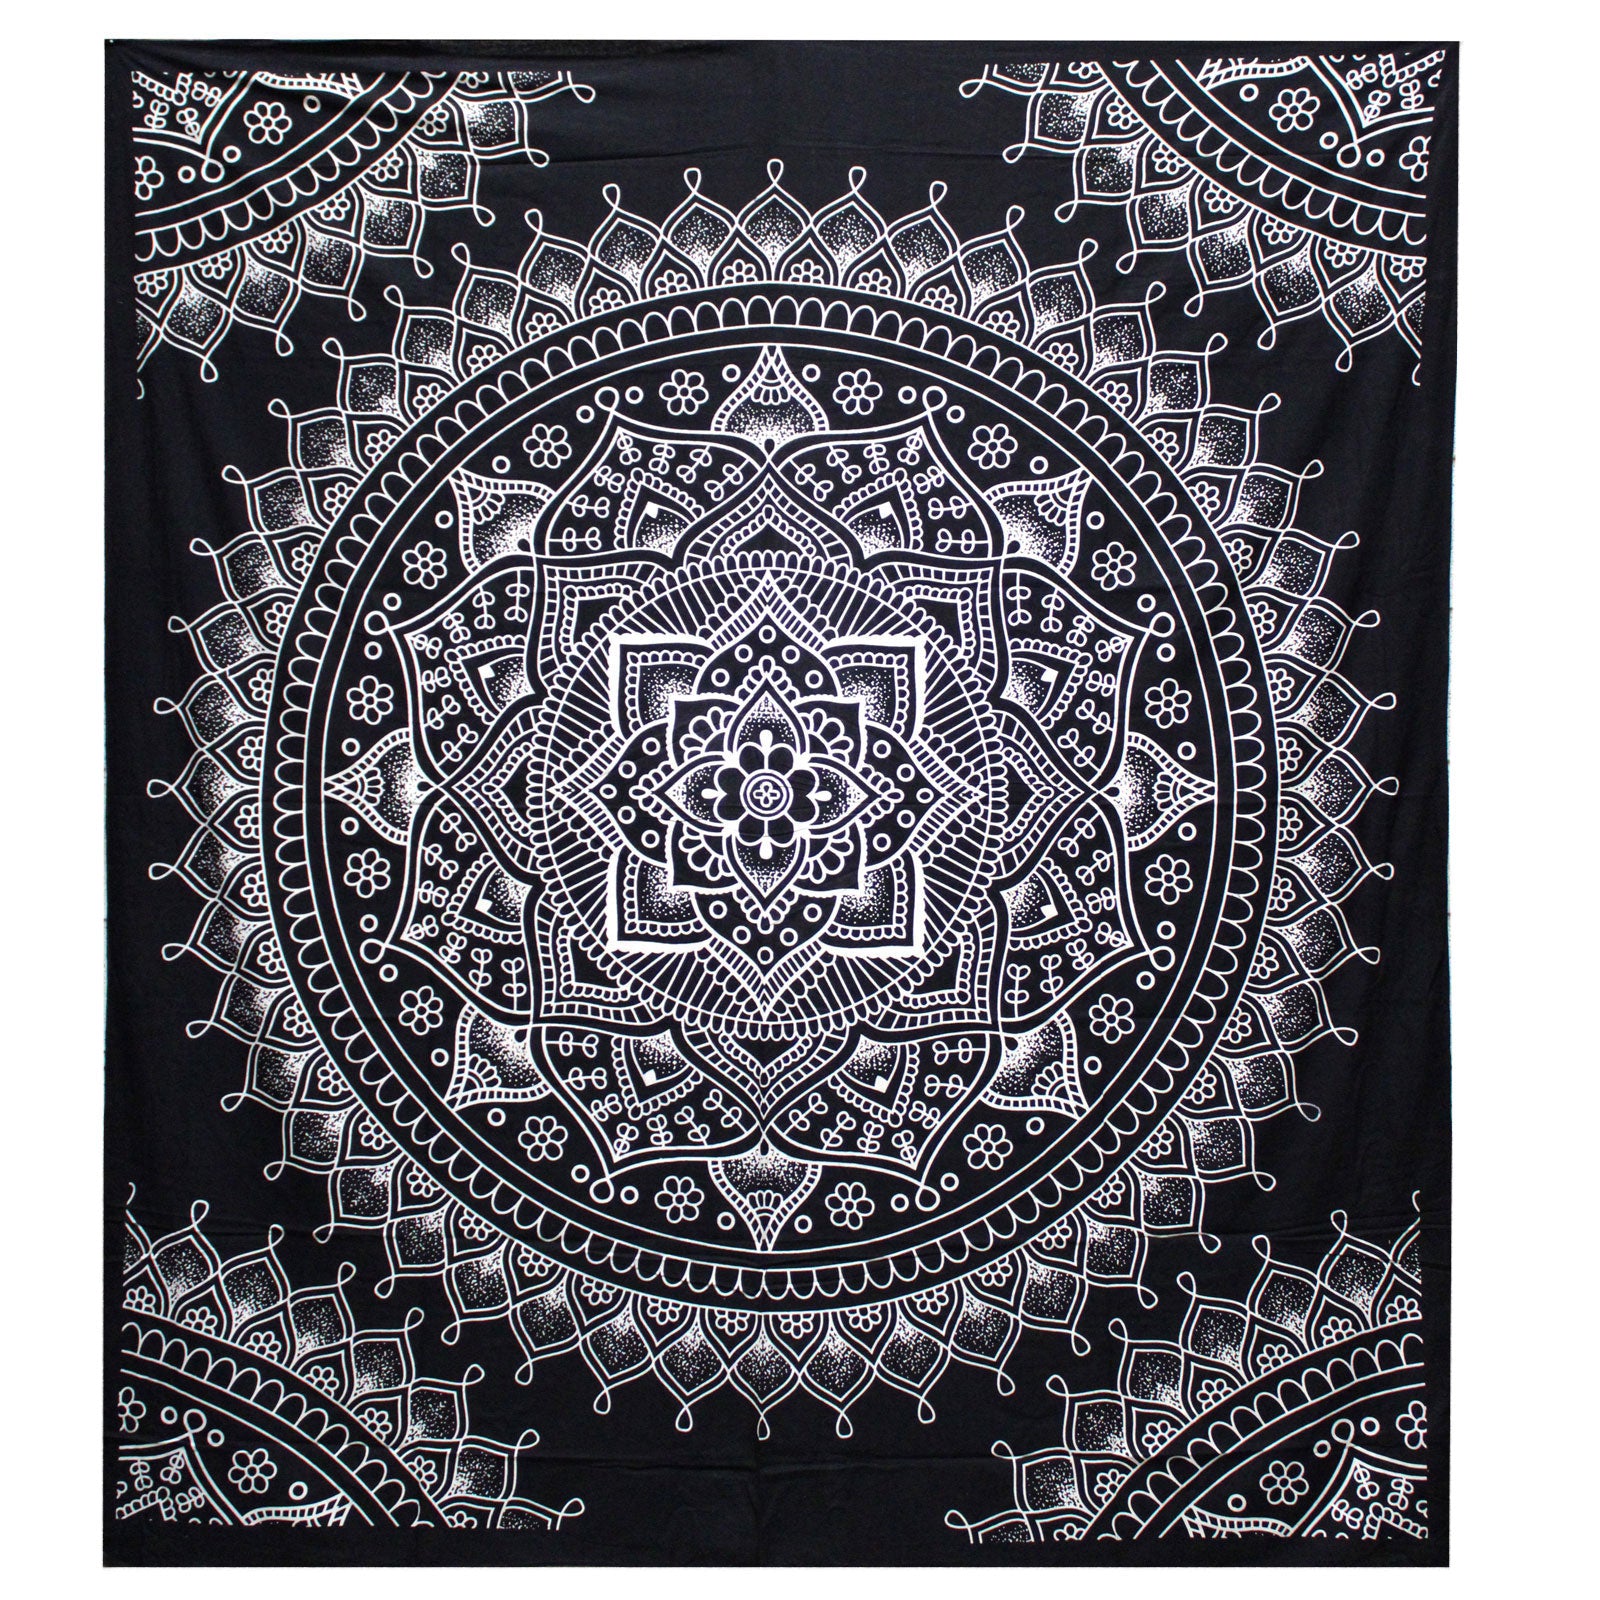 View BW Double Cotton Bedspread Wall Hanging Lotus Flower information